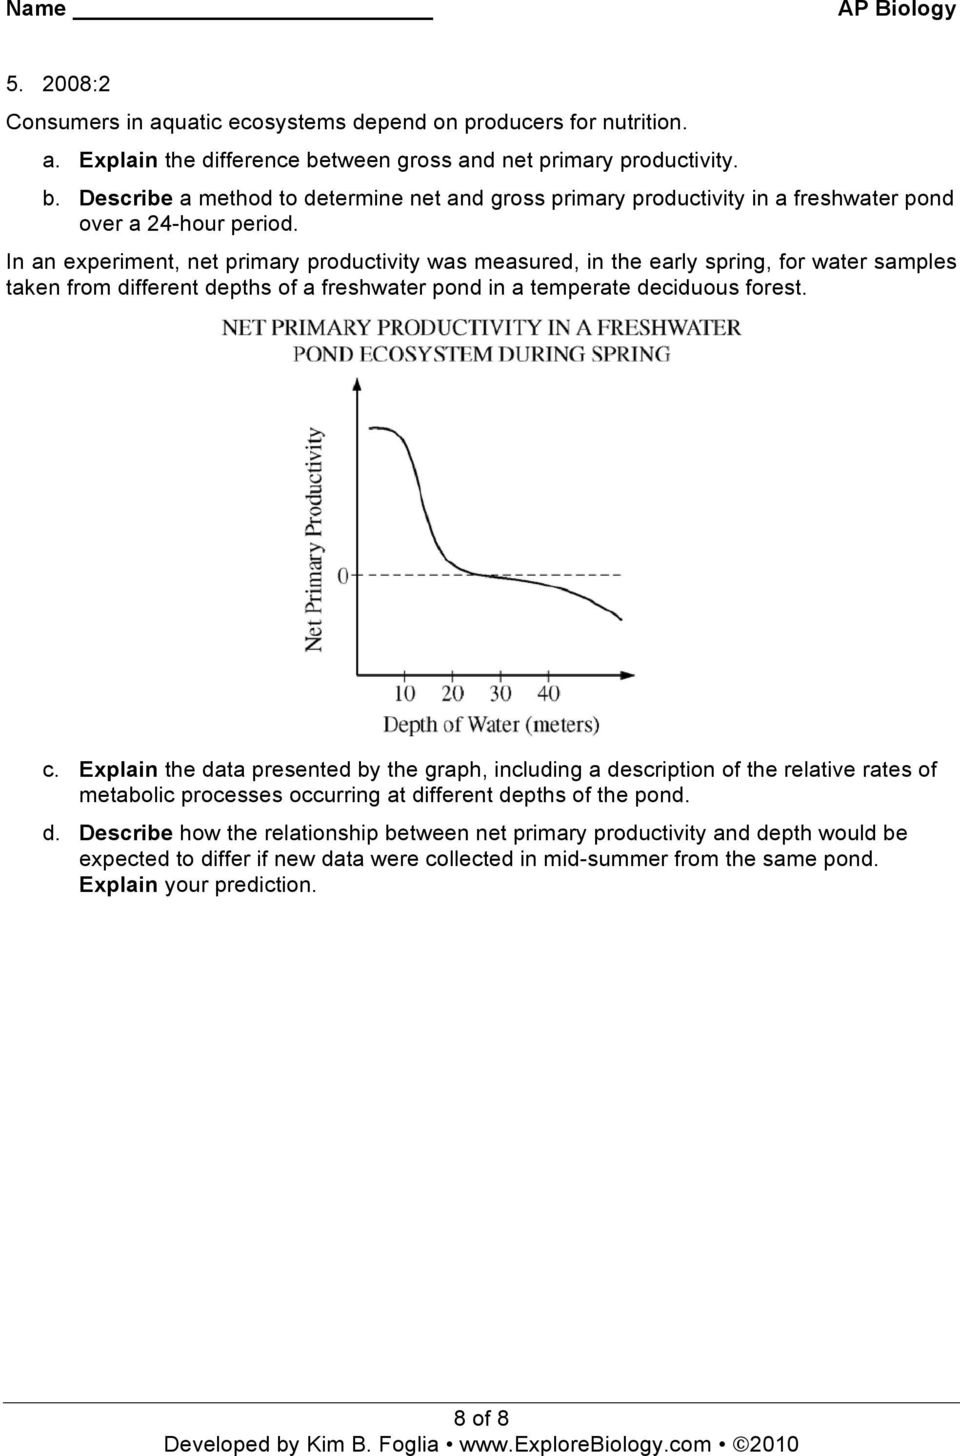 In an experiment, net primary productivity was measured, in the early spring, for water samples taken from different depths of a freshwater pond in a temperate deciduous forest. c.